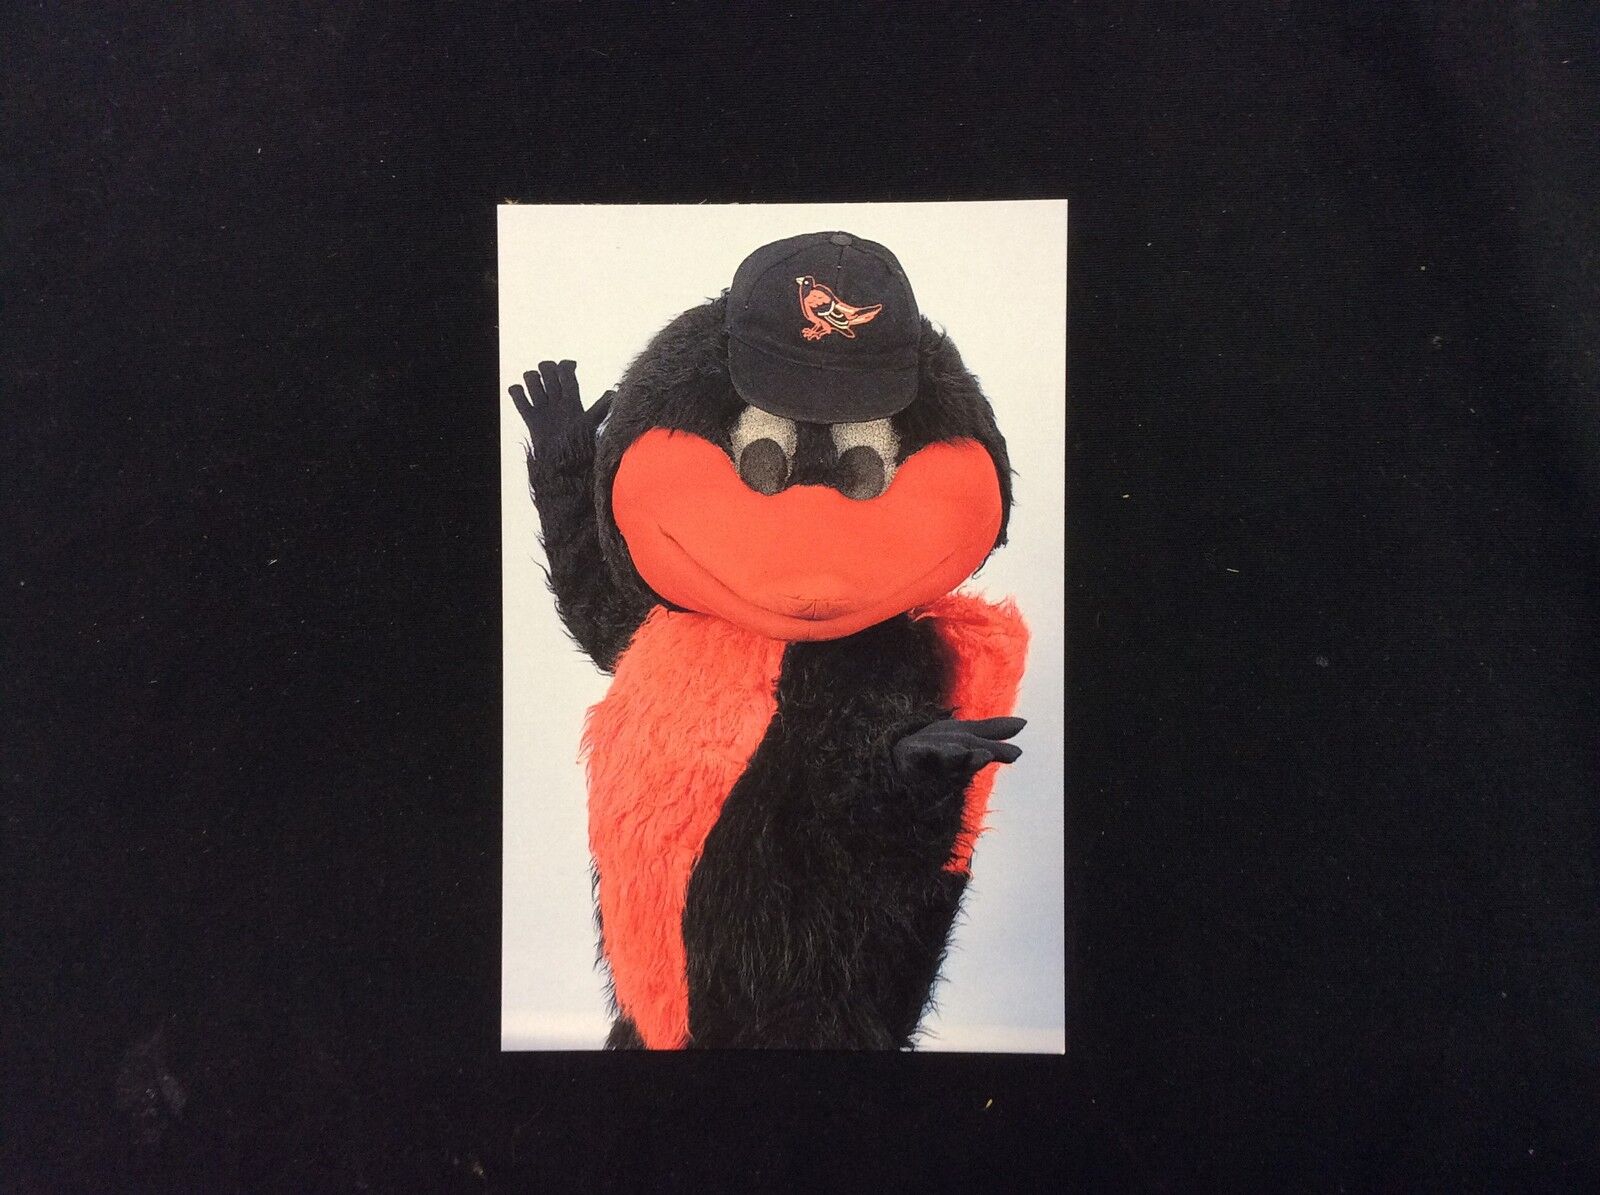 Orioles Mascot The Bird Baltimore Orioles 3x5 team issued postcard